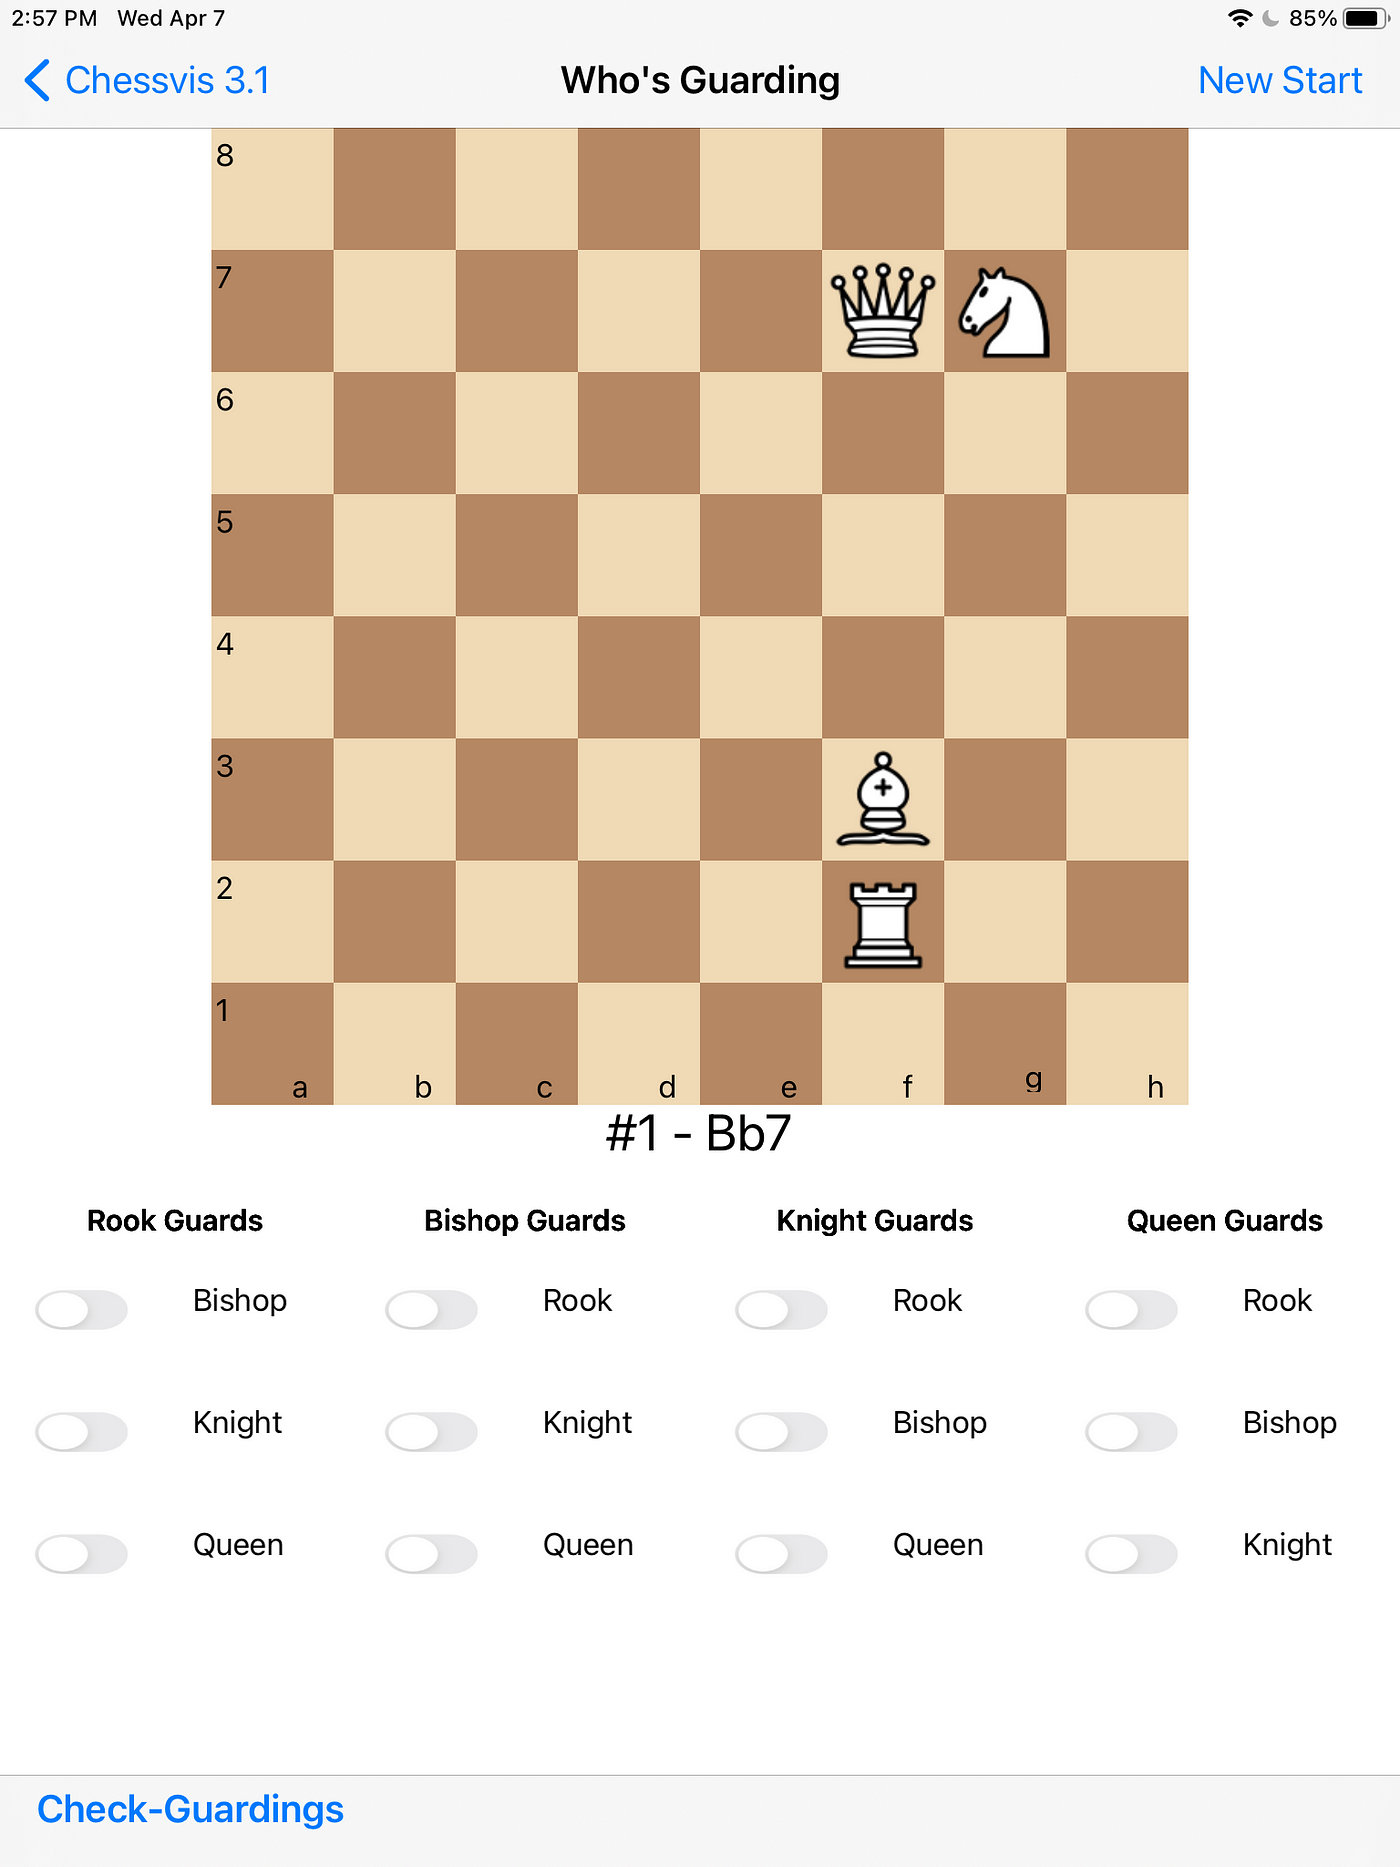 The Complete Guide to Chess Visualization